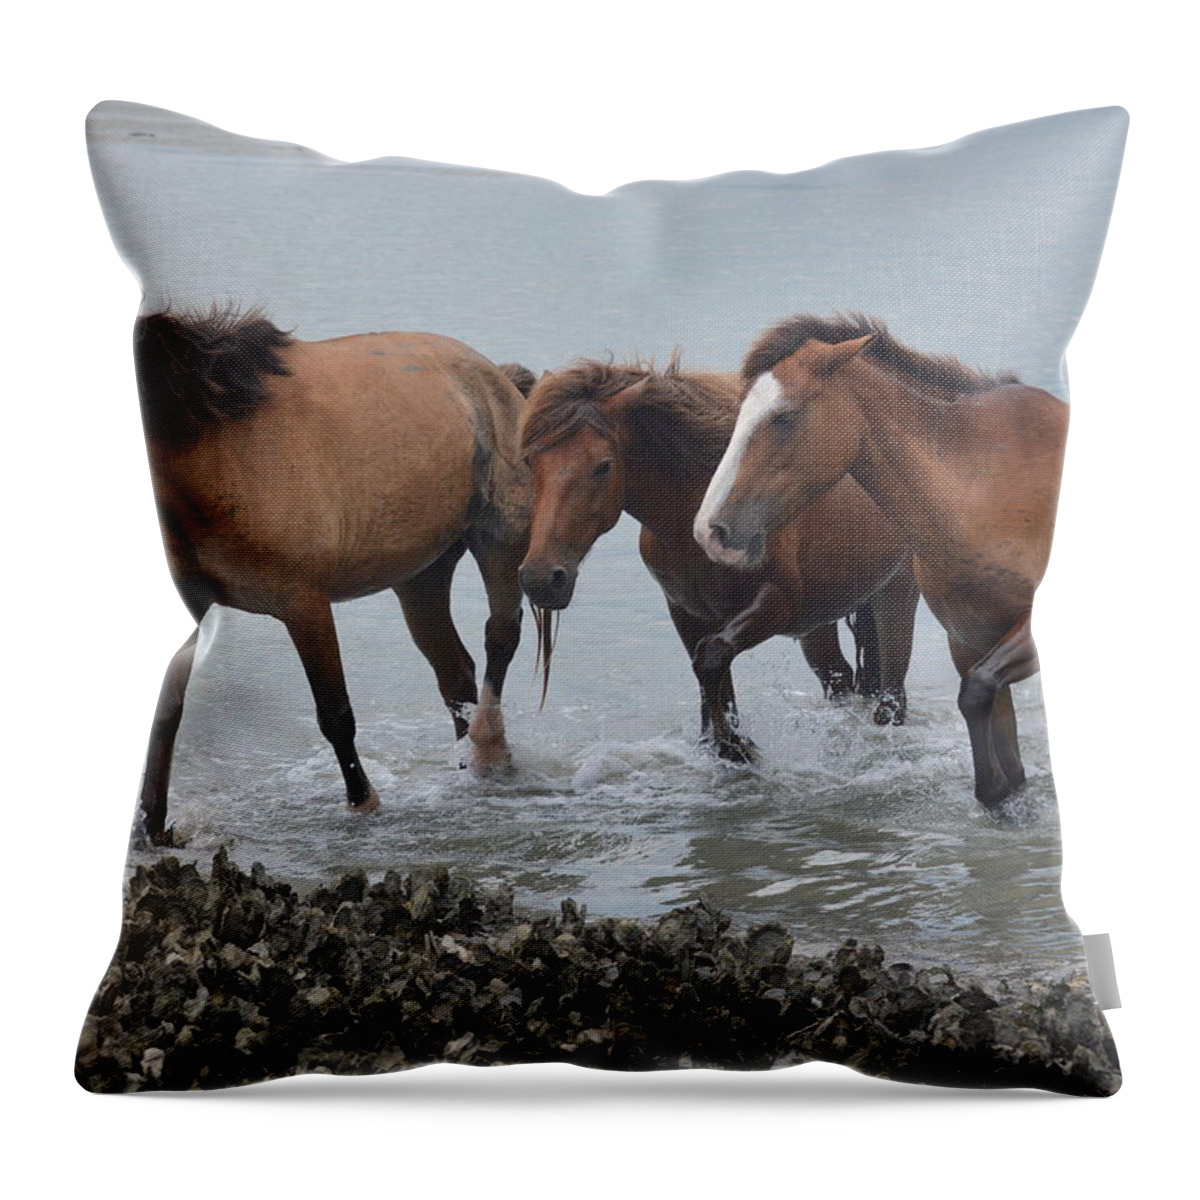 Island Pony Throw Pillow featuring the photograph Coming Ashore by Dan Williams